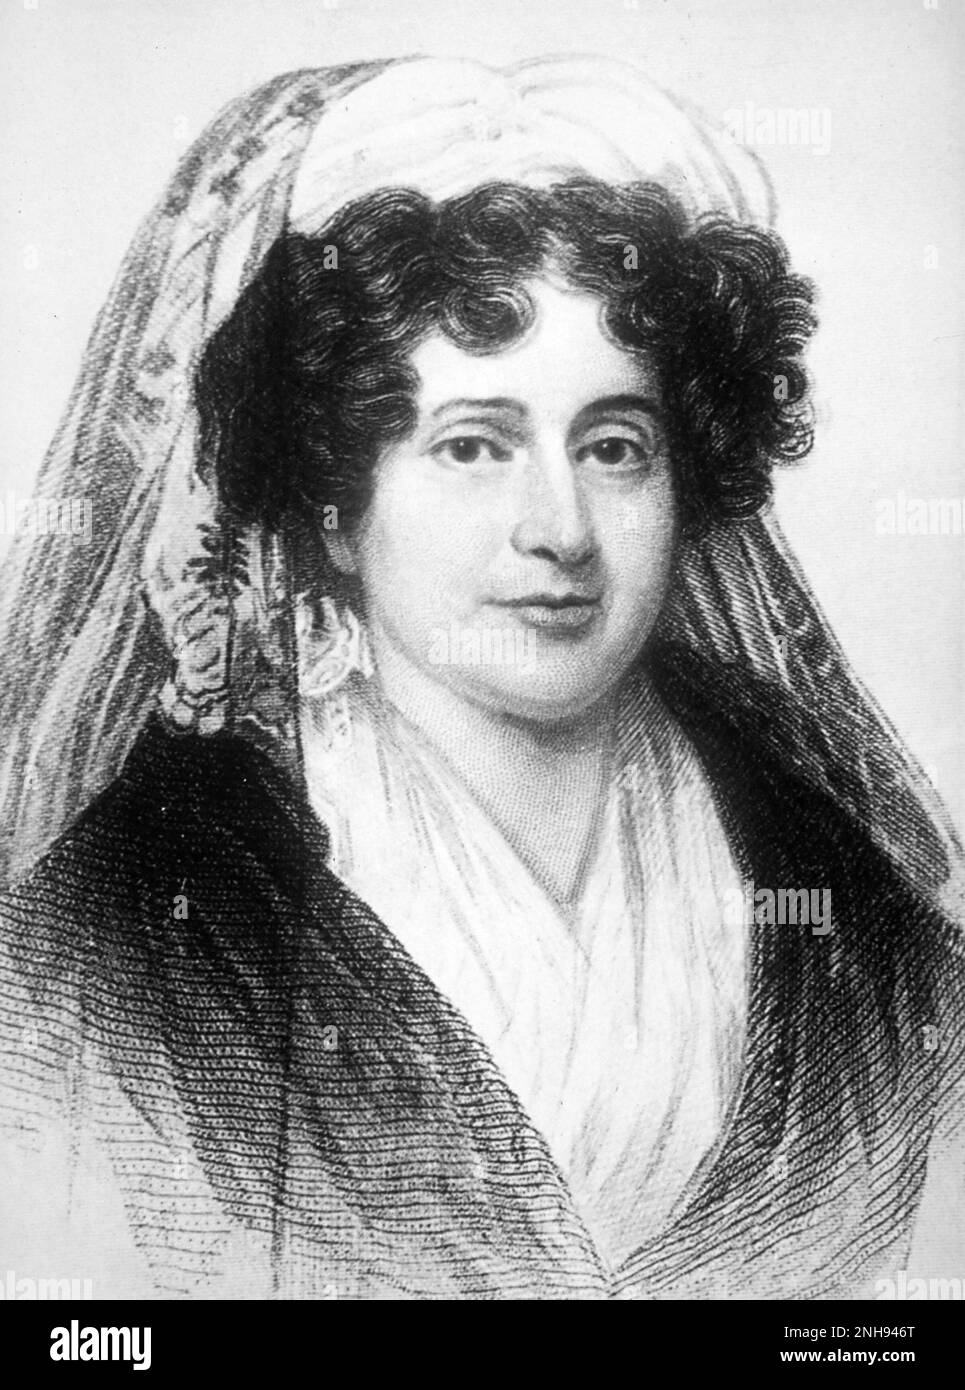 Emma Hart Willard (1787-1870) was an American female education activist who founded the first school for women's higher education, the Troy Female Seminary in Troy, New York. With the success of her school, Willard was able to travel across the country and abroad, to promote education for women. Portrait circa 1805-1815./n/n Stock Photo